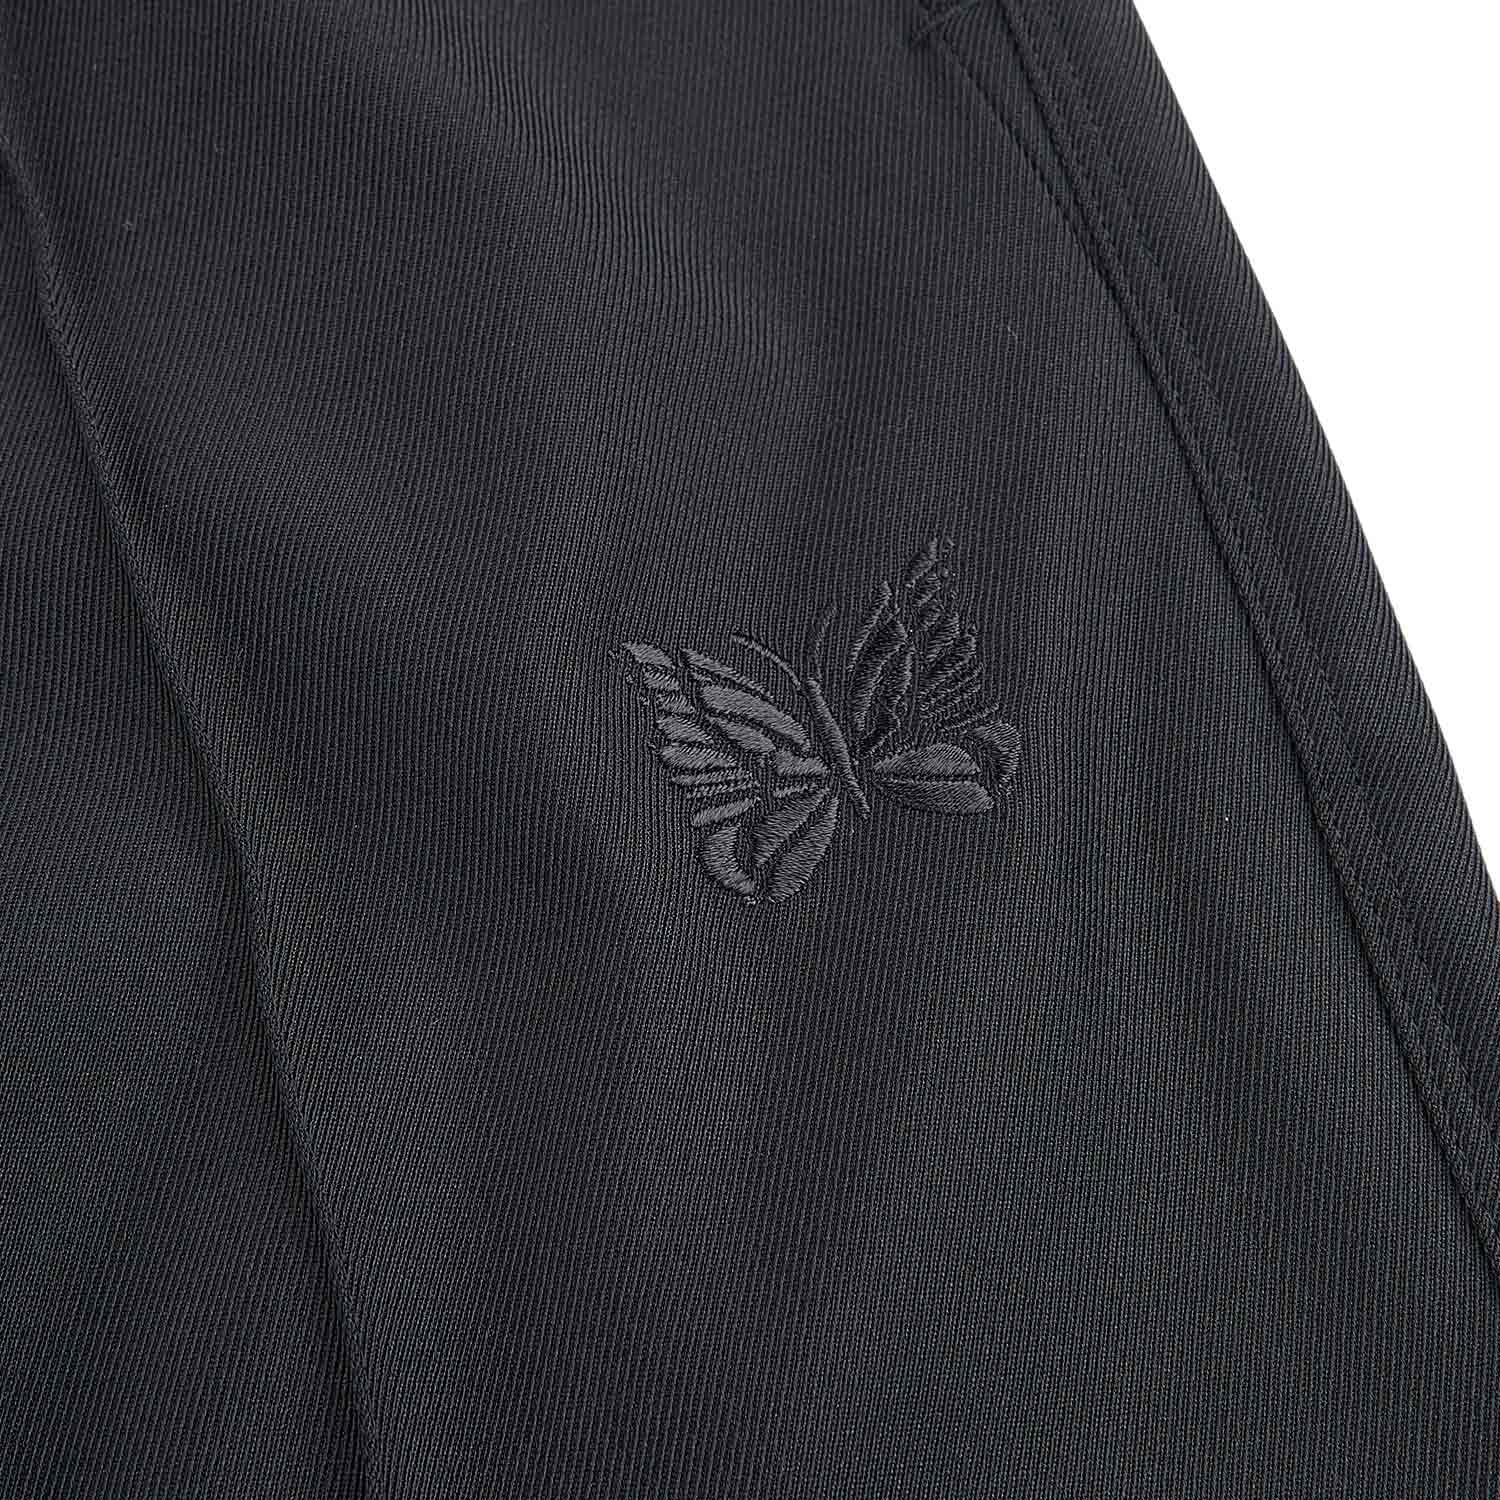 adidas Twill Trackpants for women, black - Buy online! - HERE